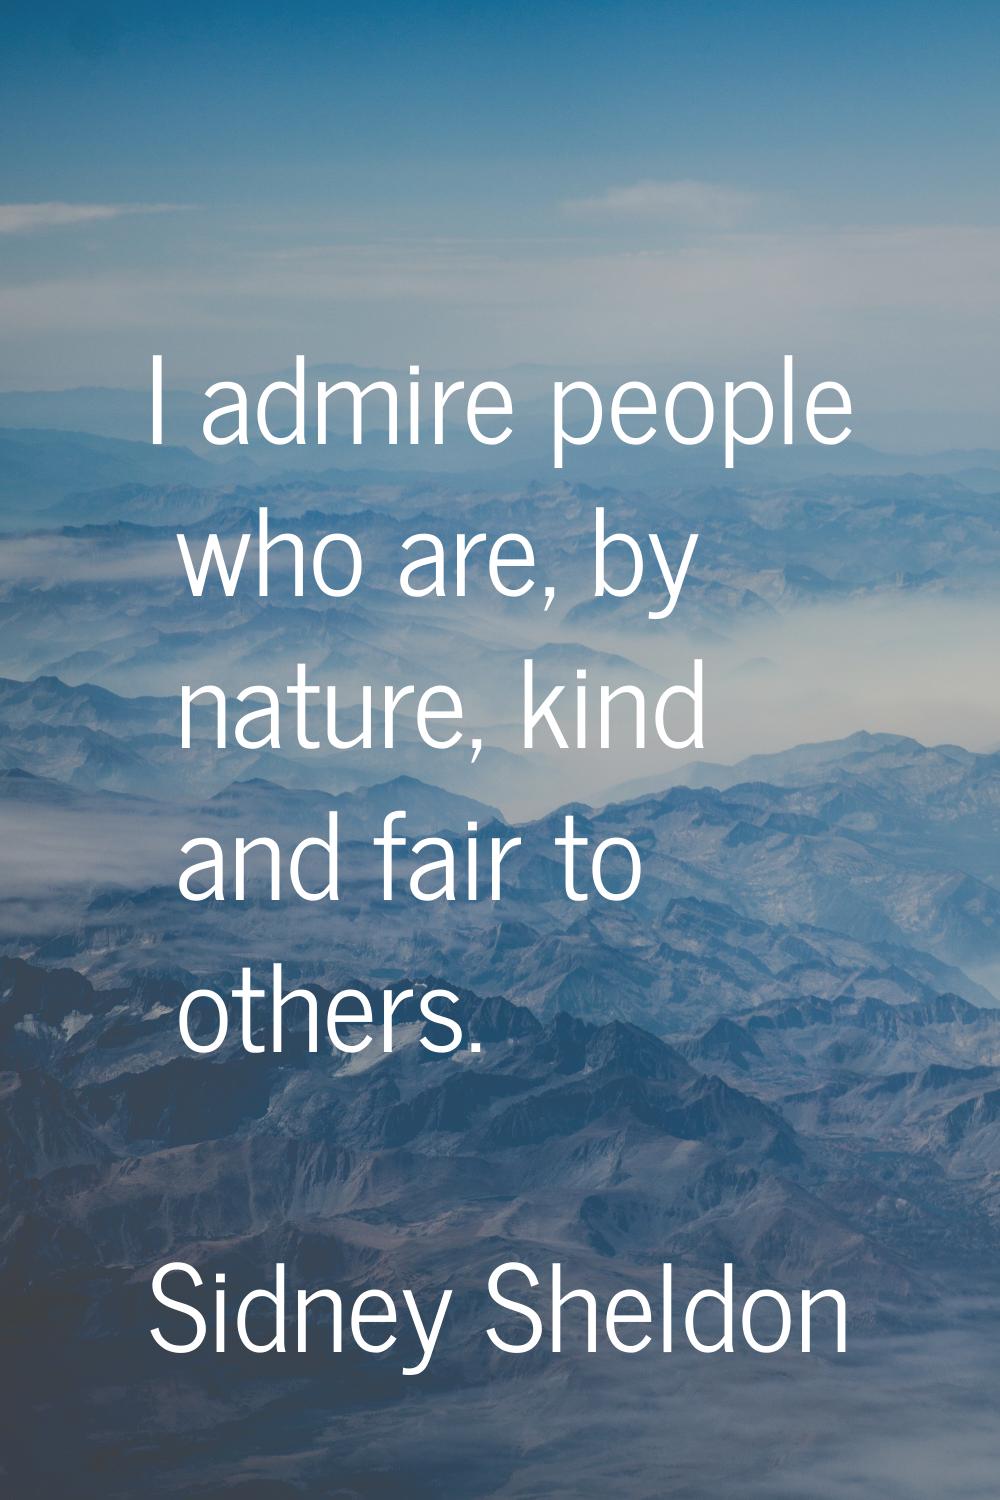 I admire people who are, by nature, kind and fair to others.